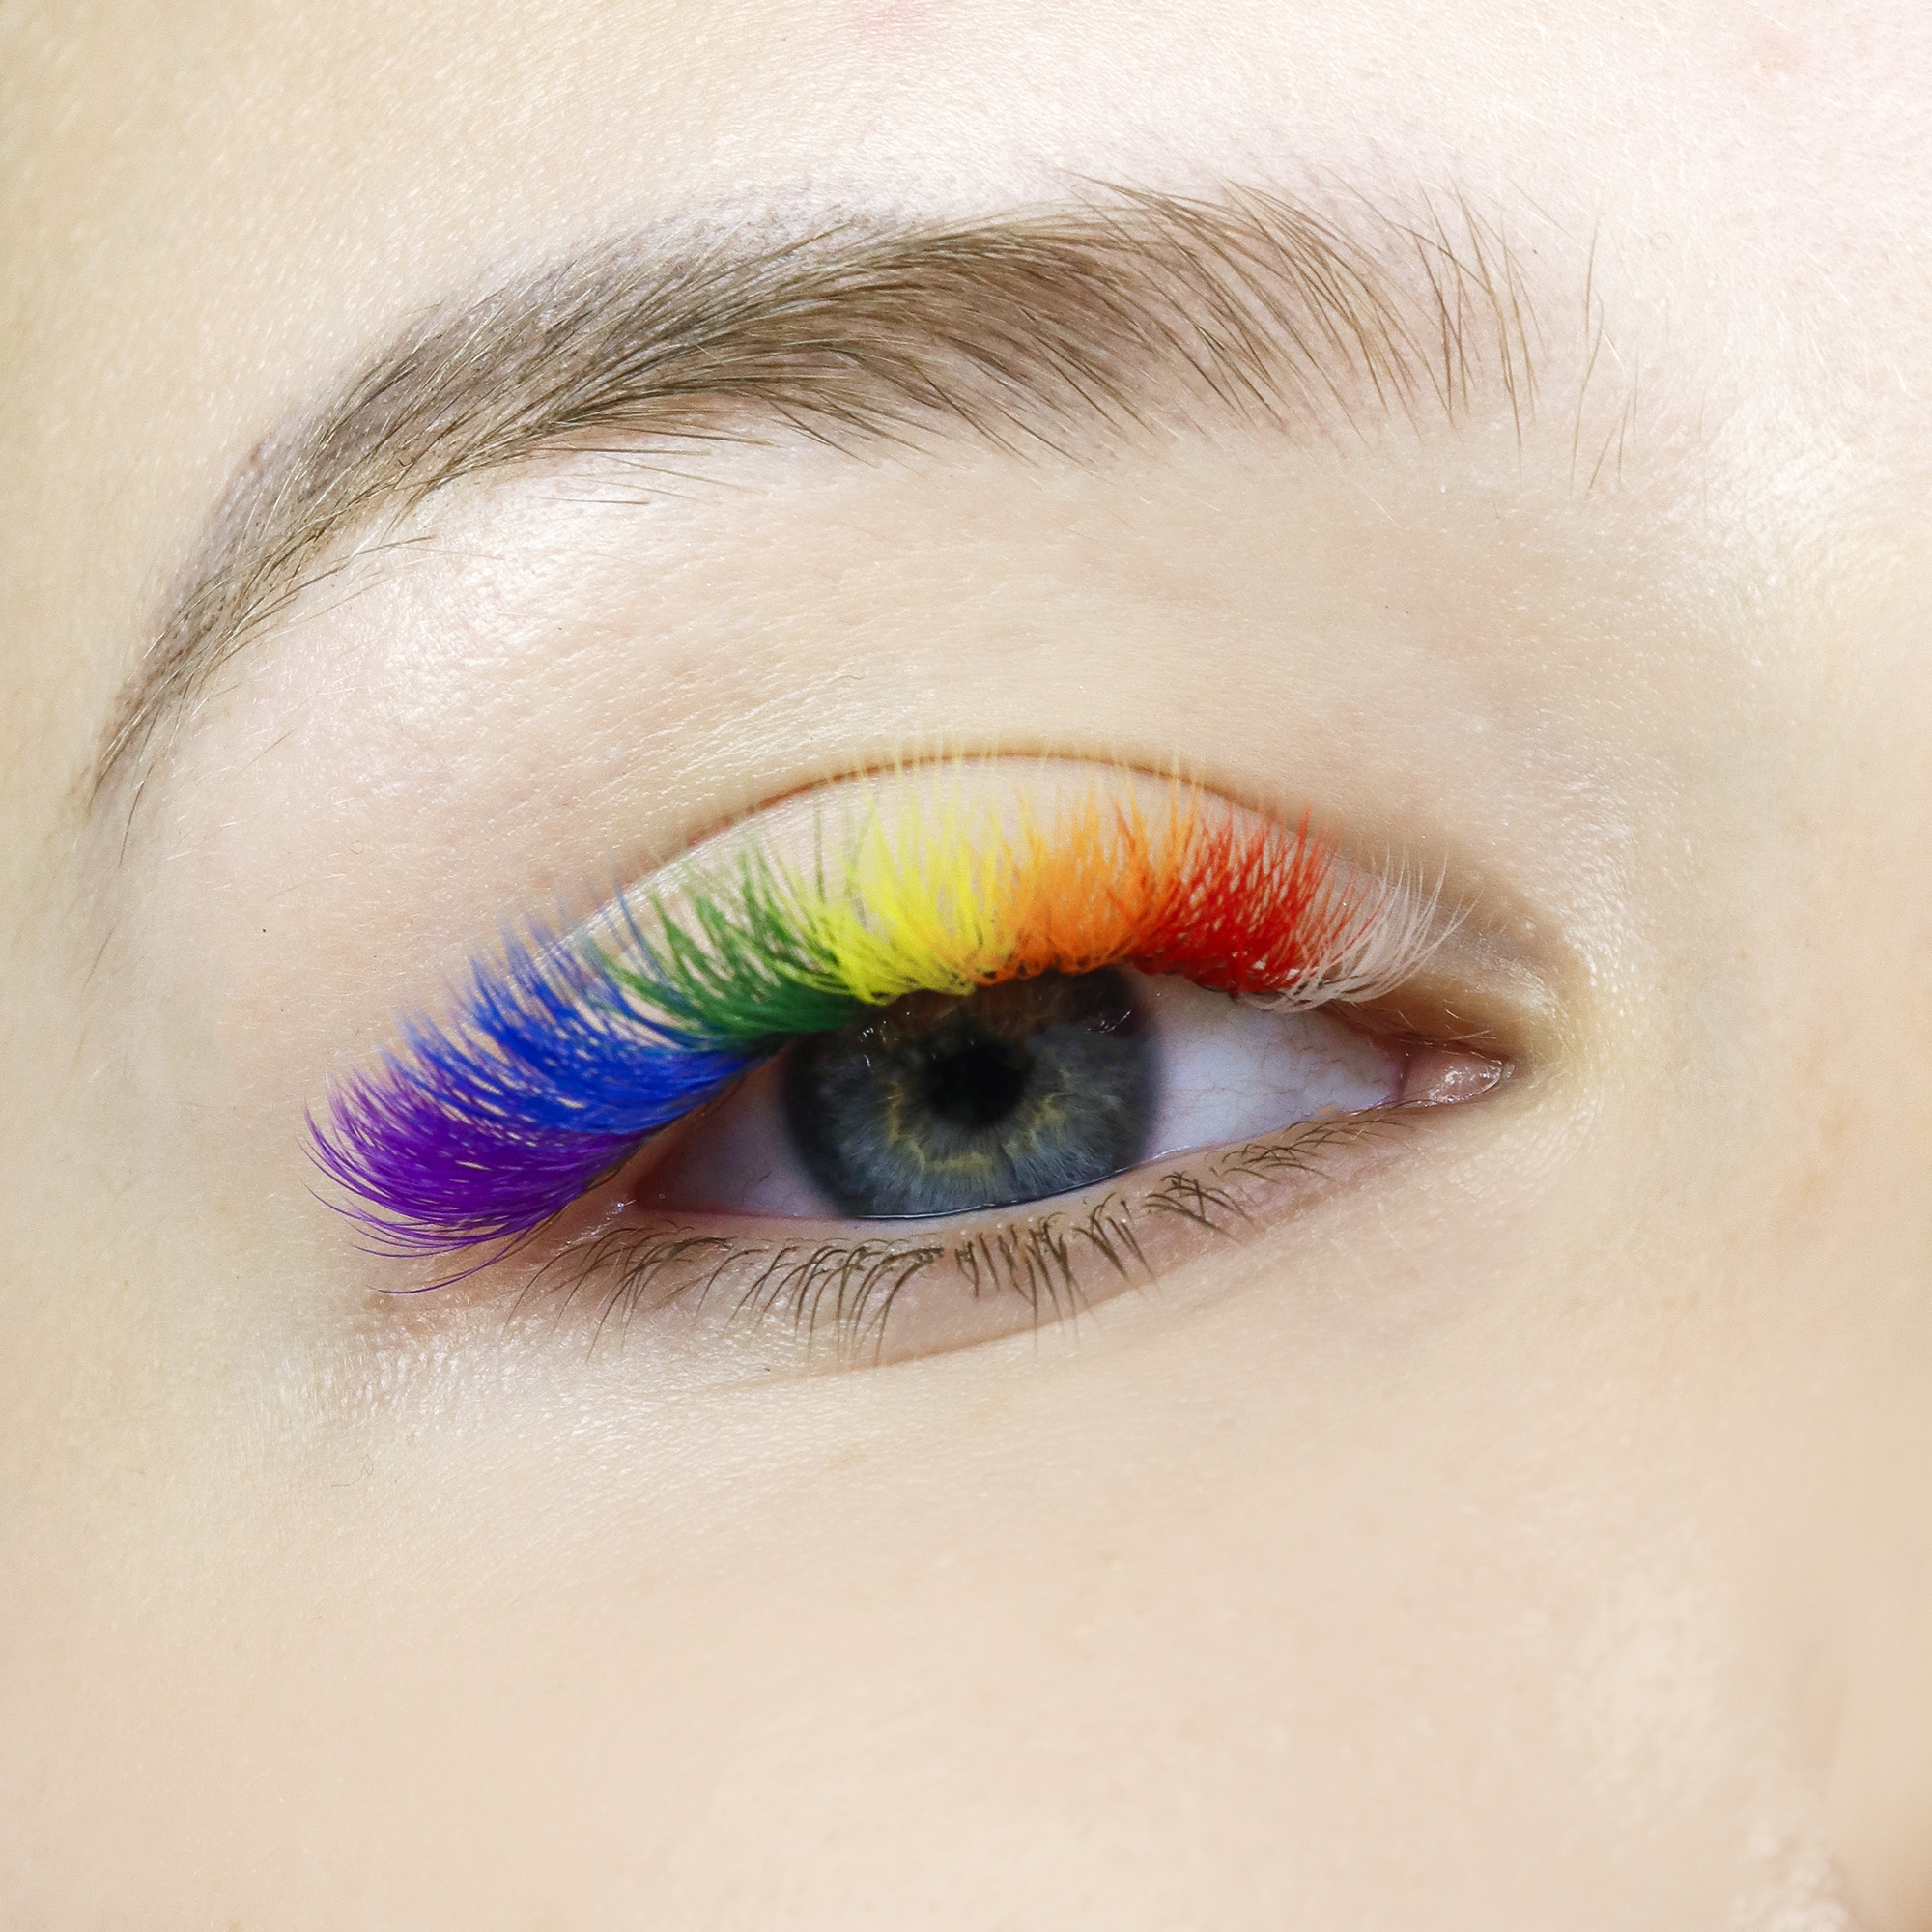 Rainbow eyelash extensions are exclusively for fashion-forward clients who embrace the extraordinary and want to make a bold statement.